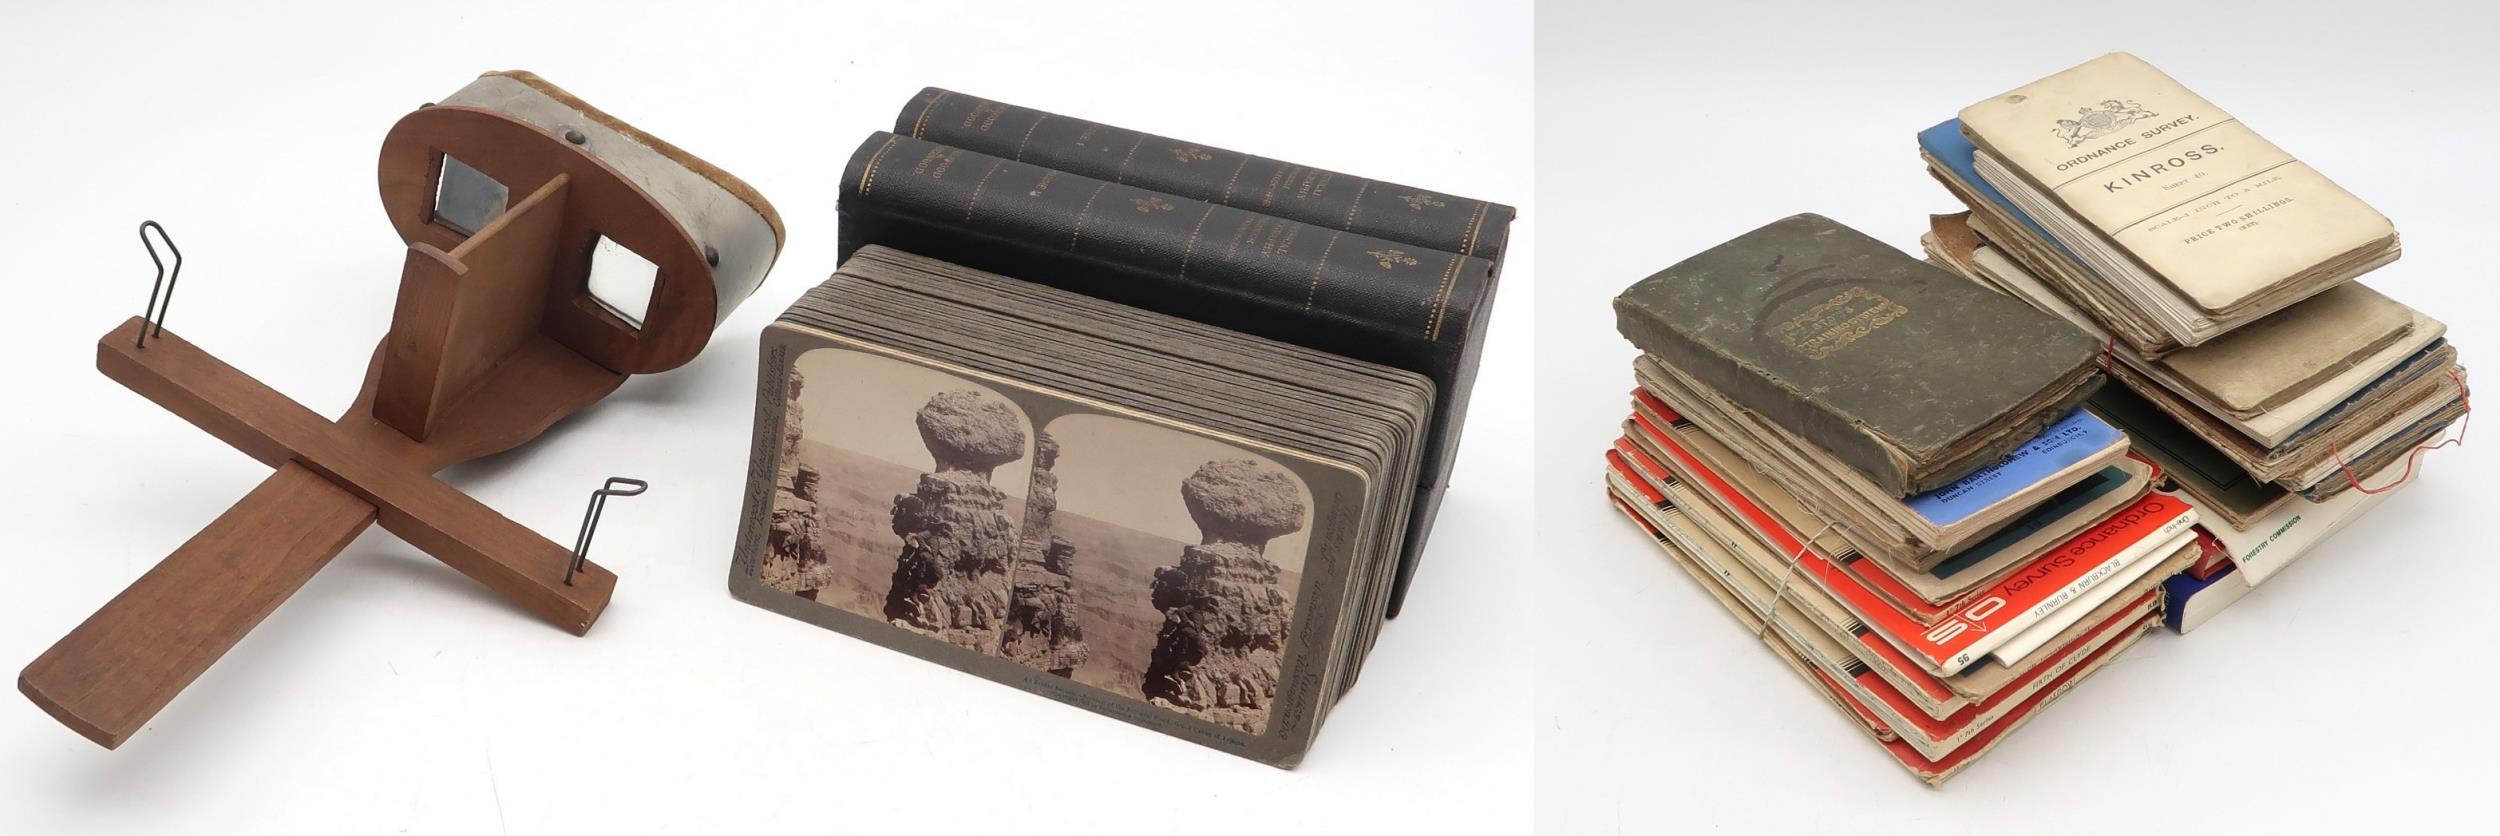 A stereoscopic slide viewer, with a cased set of views titled Physical Geography Through the